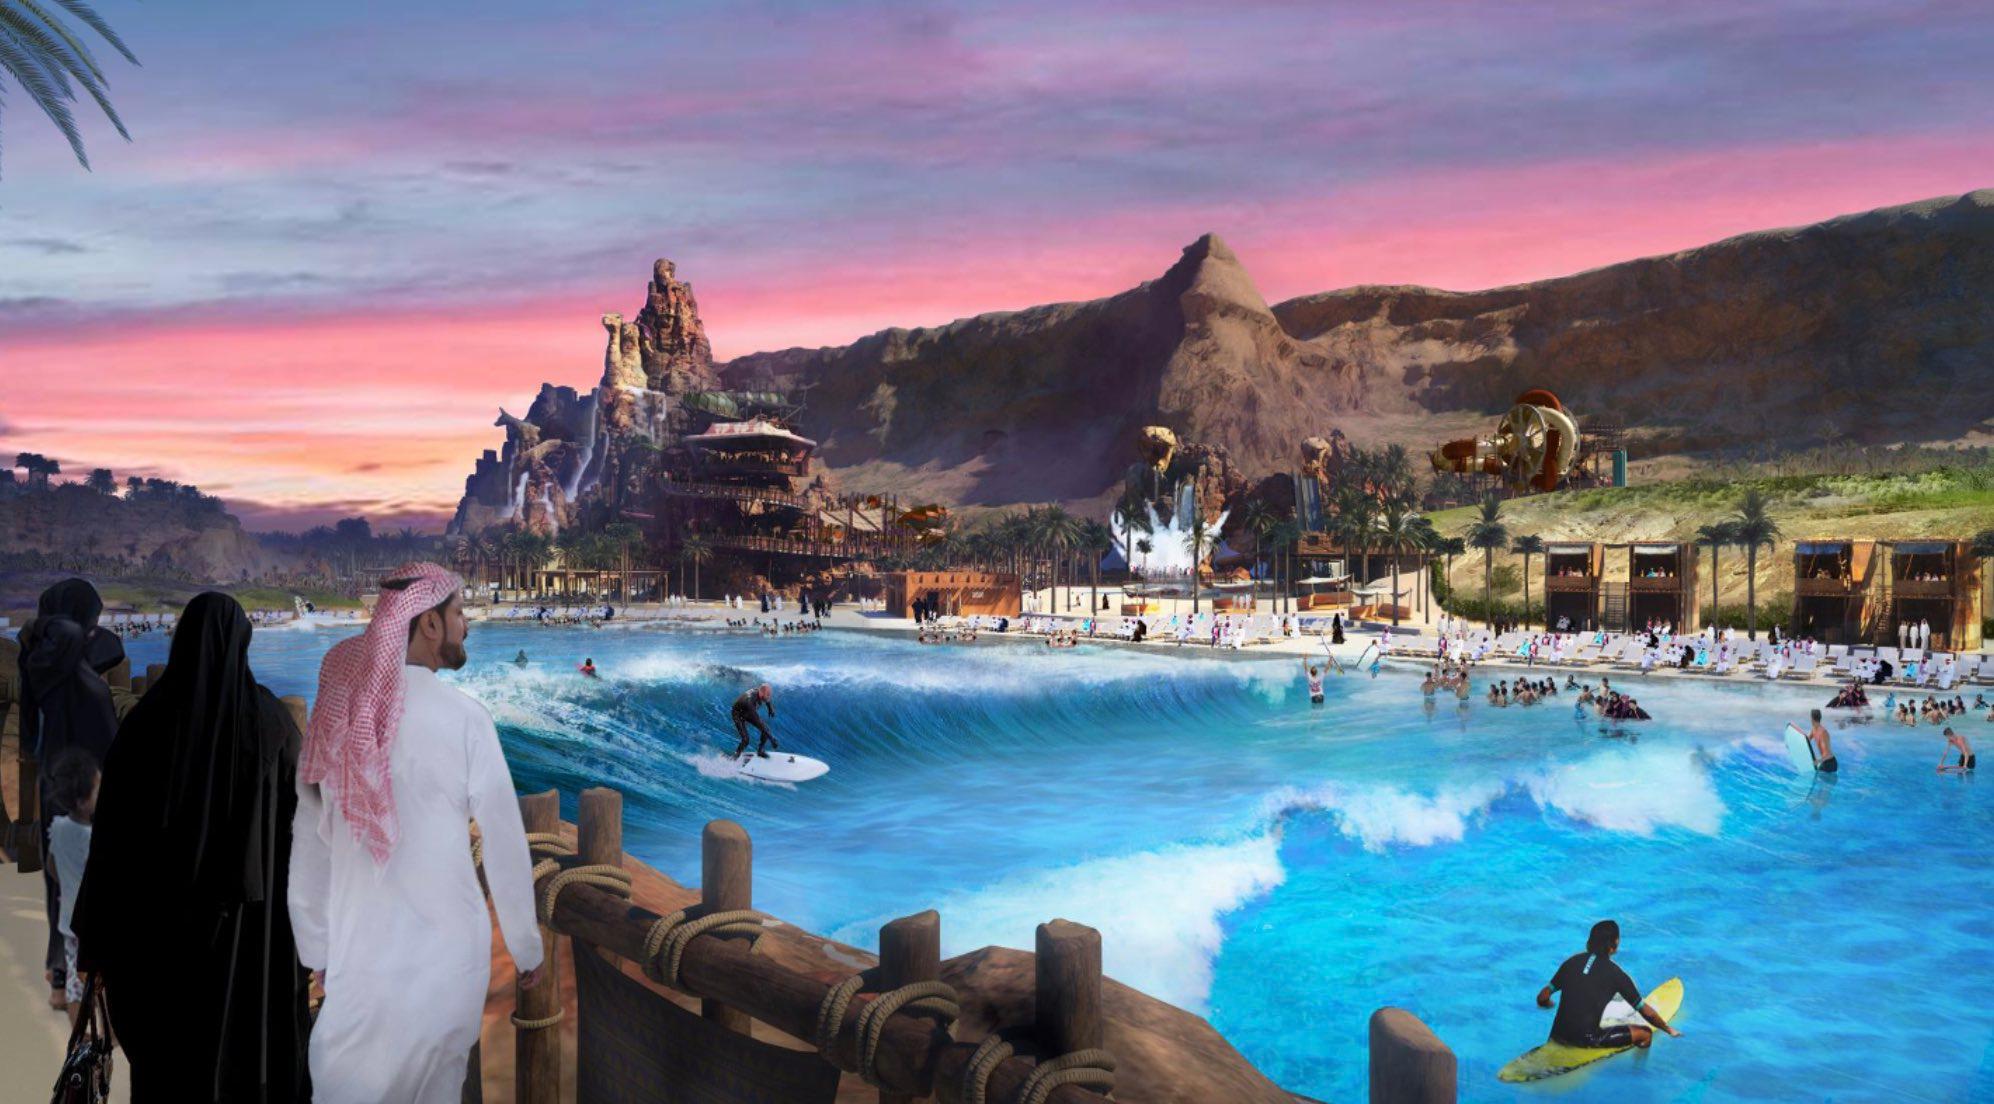 Saudi Arabia's Aquarabia Water Park will be the largest in the Middle East